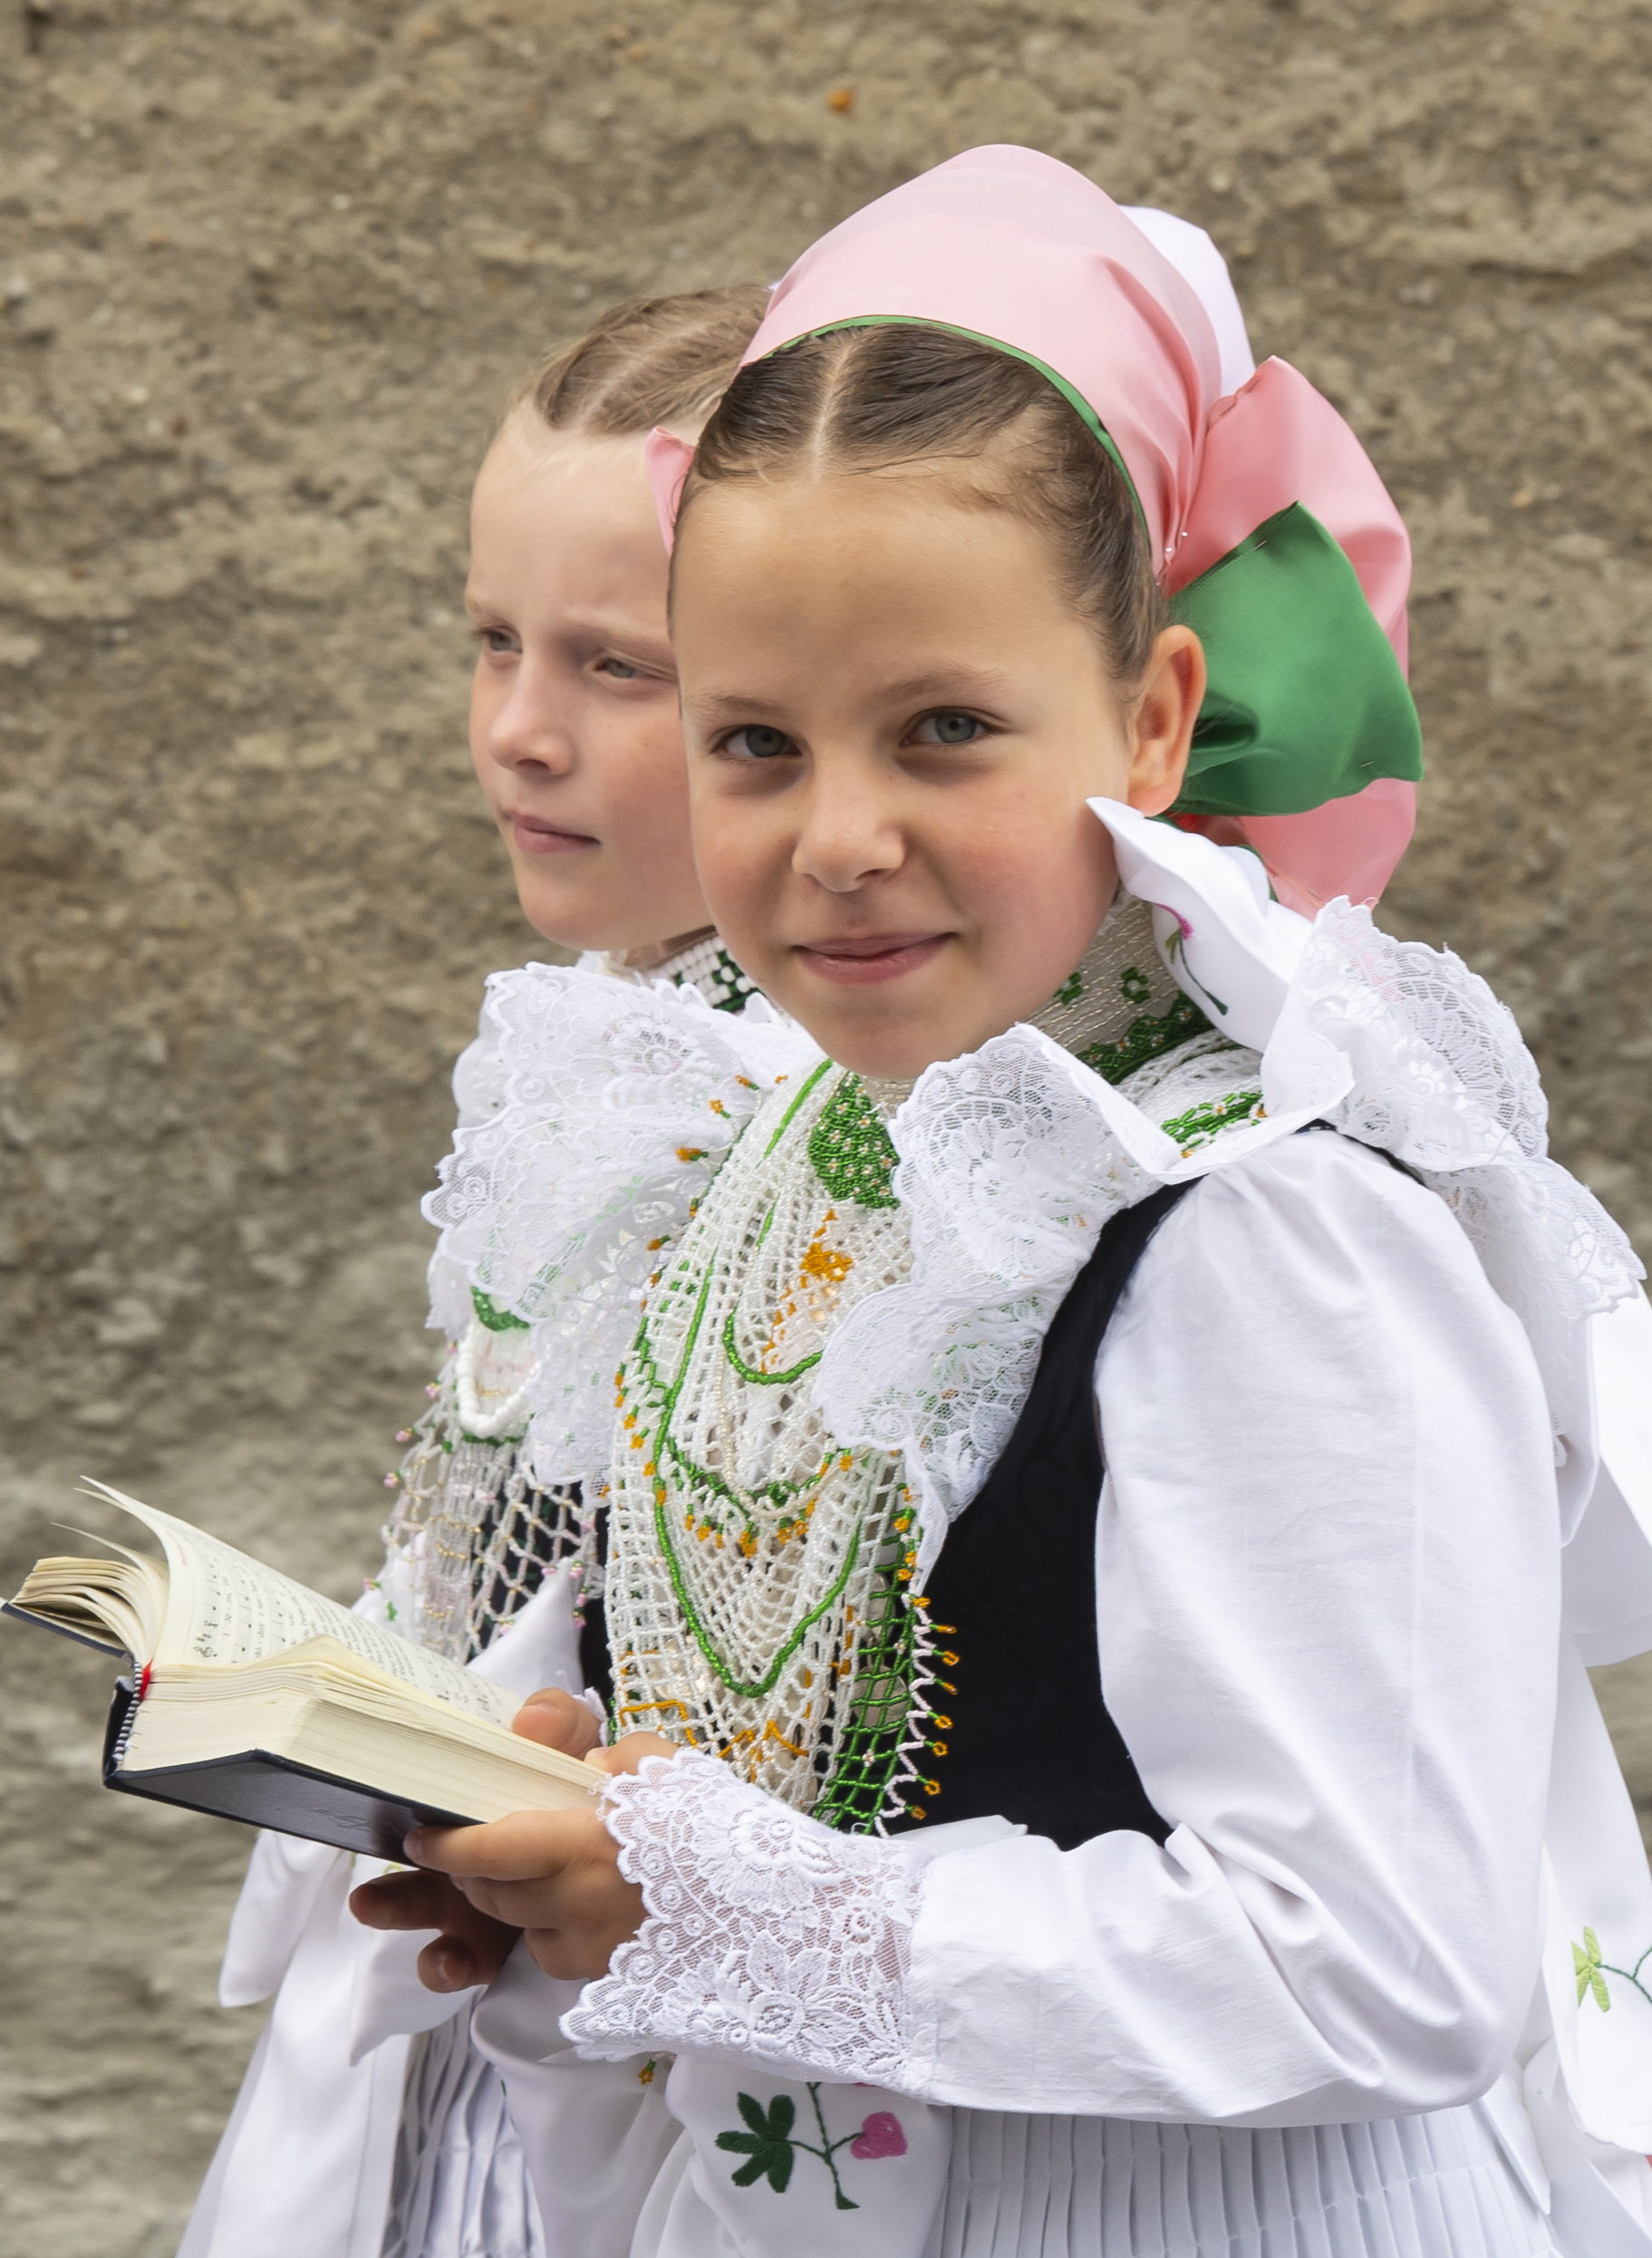 Children dressed in the traditional clothes of the Sorbs attend a Corpus Christi procession in Crostwitz, Germany, Thursday, June 20, 2019. The catholic faithful Sorbs are acknowledged as a national minority near the German-Polish border with their own language in eastern Germany. The procession to commemorate the solemnity of the body and blood of Christ has been a tradition in Lusatia (Lausitz) region. (AP Photo/Jens Meyer)